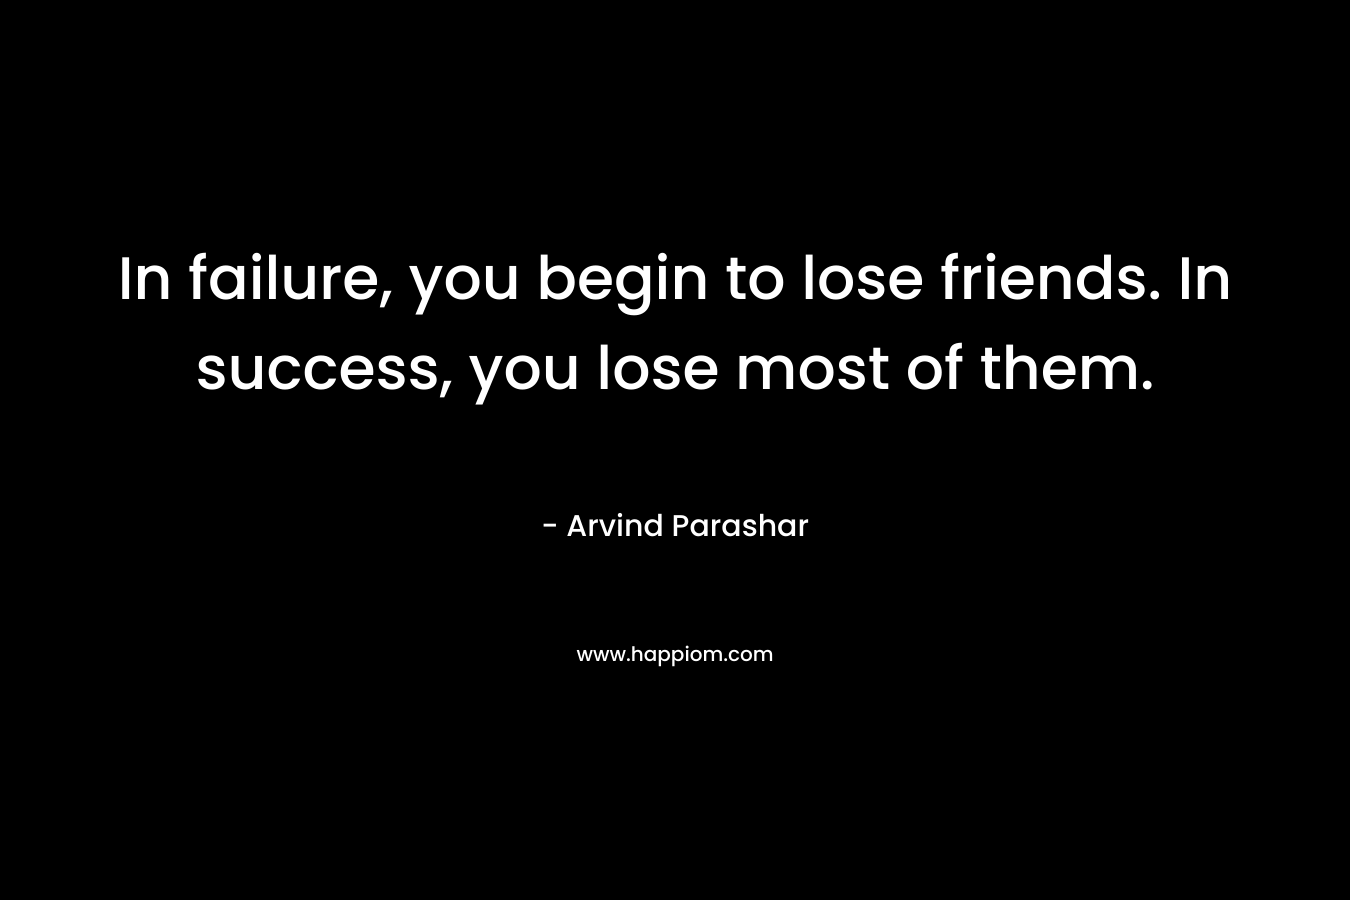 In failure, you begin to lose friends. In success, you lose most of them. – Arvind Parashar